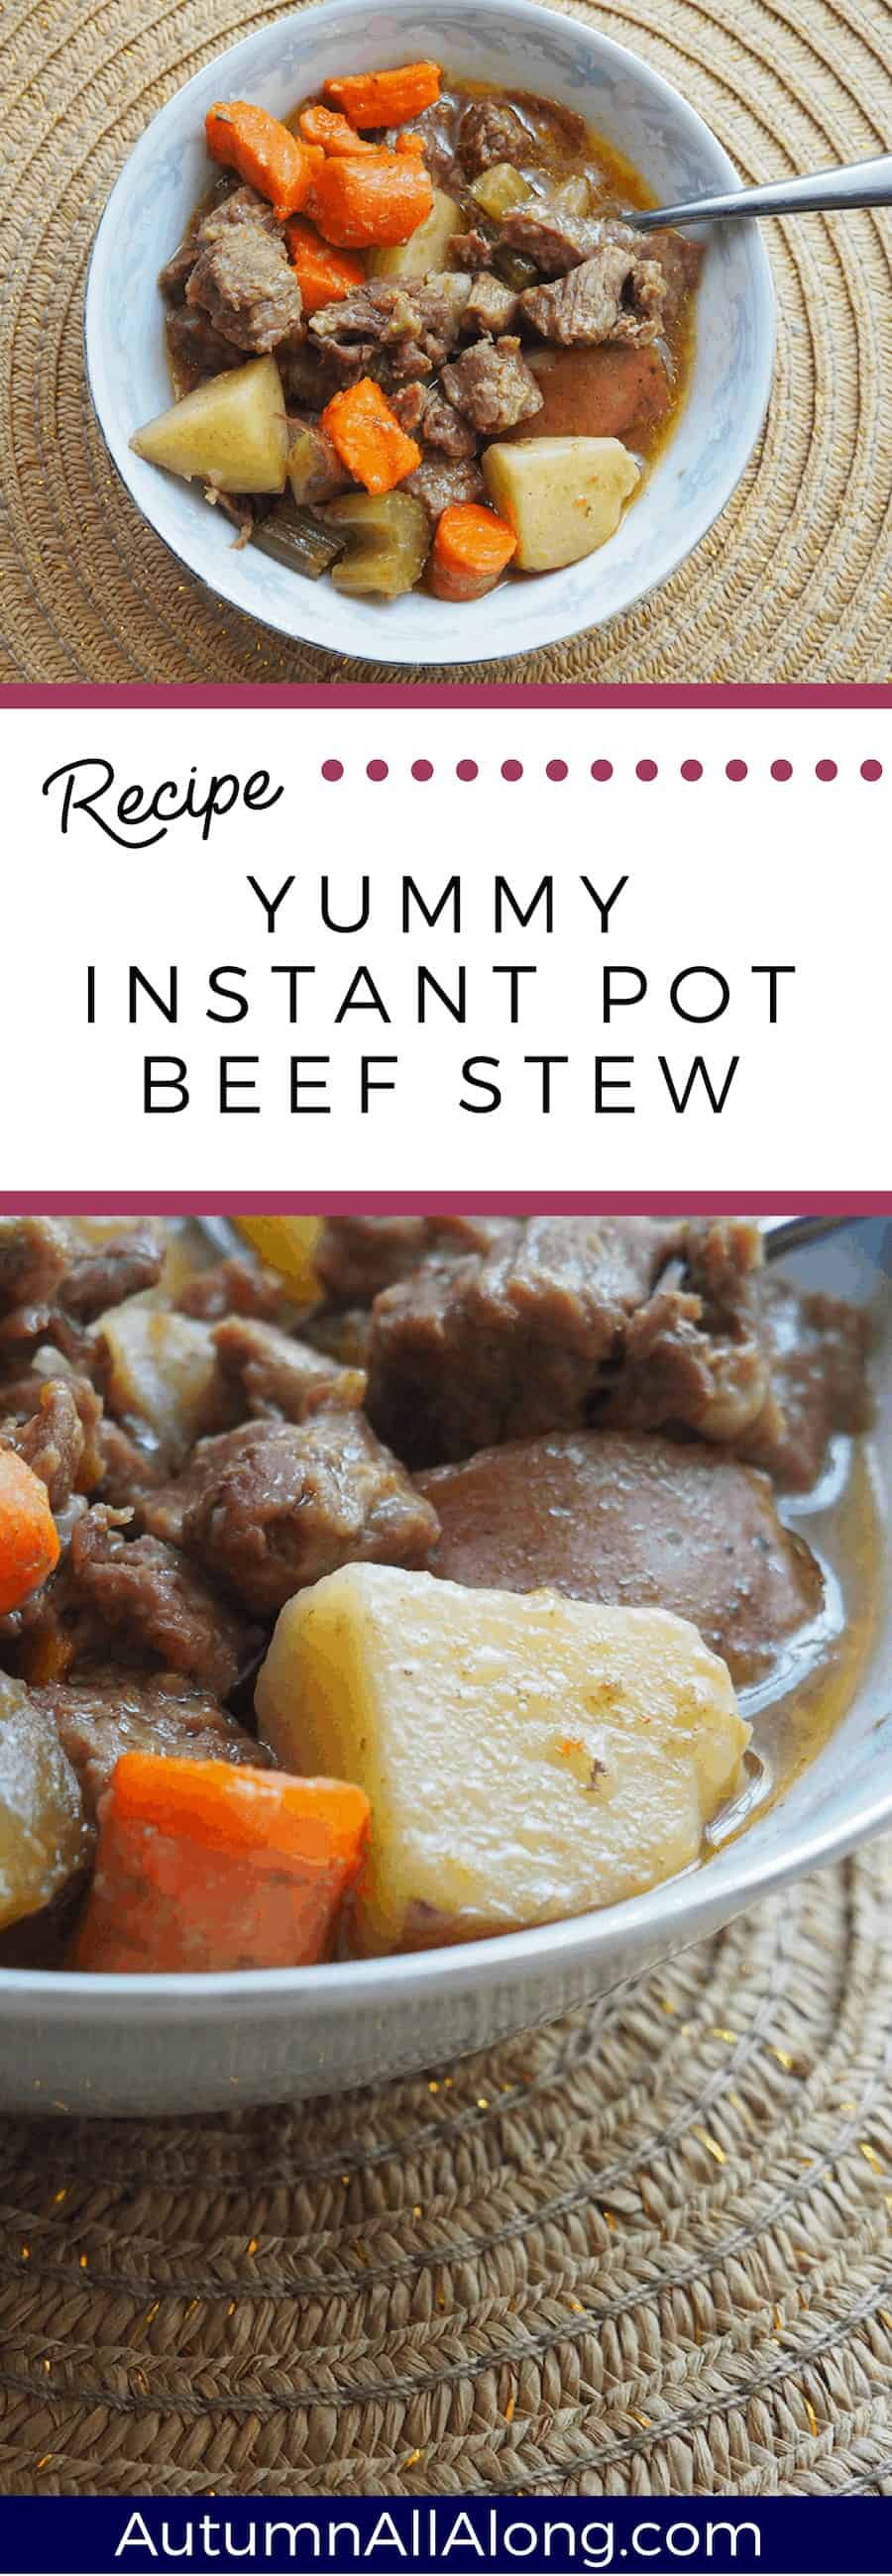 This delicious instant pot beef stew recipe is fast, delicious, and takes under 45 minutes from start to finish! | via Autumn All Along